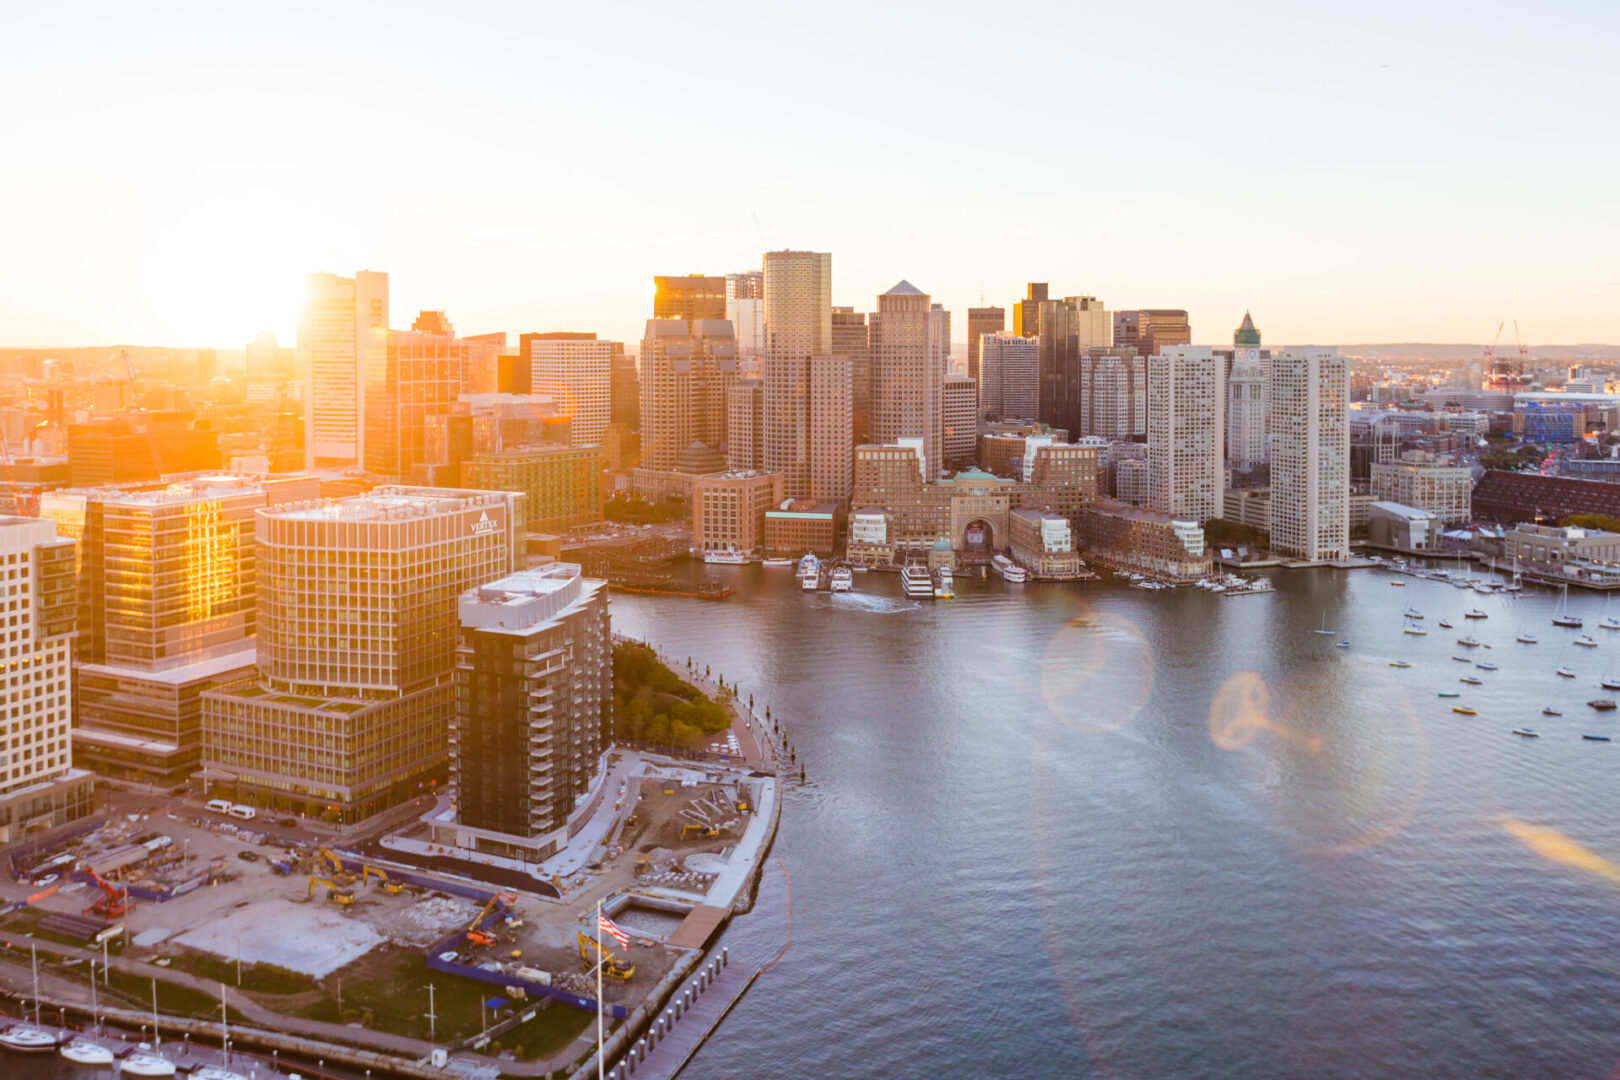 Aerial photograph of the East Boston Waterfront at Sunset.